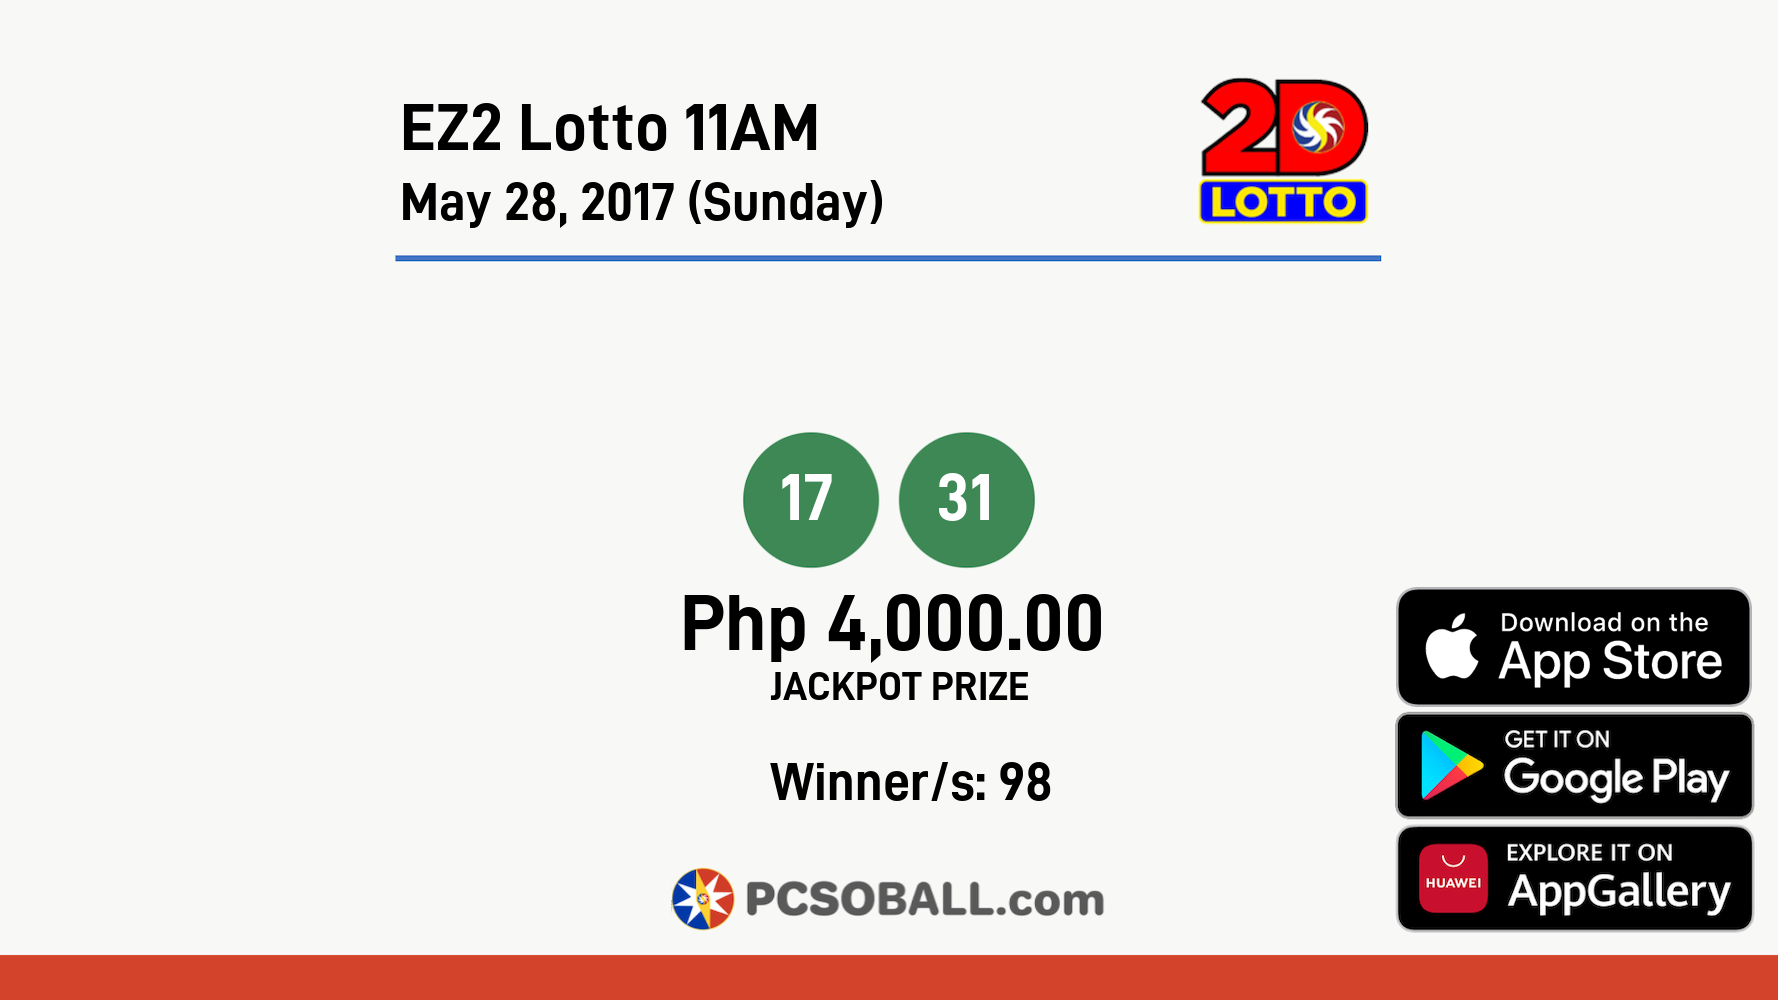 EZ2 Lotto 11AM May 28, 2017 (Sunday) Result